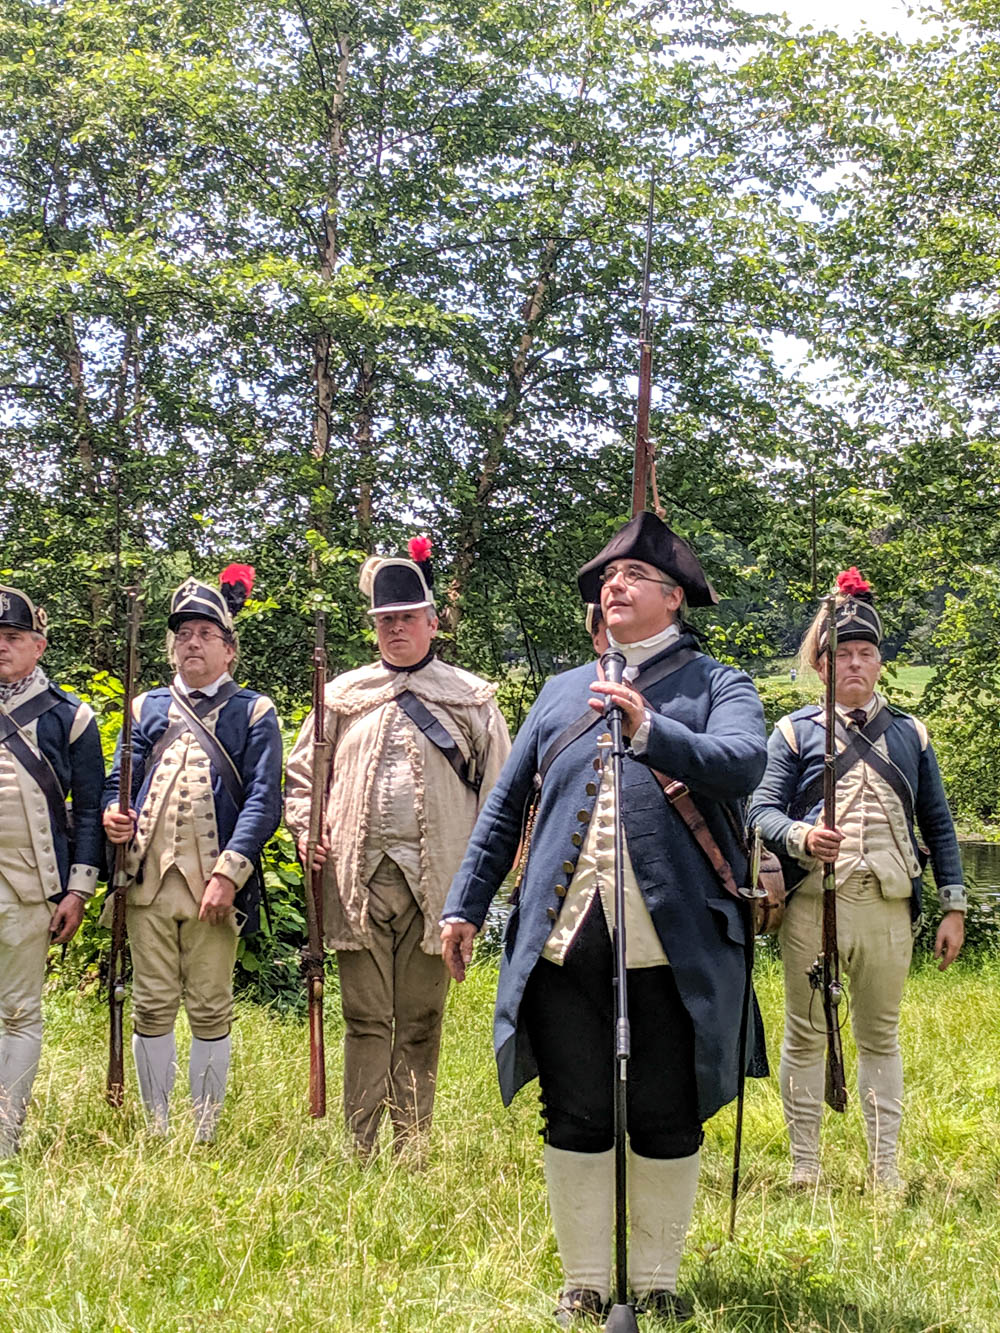 July 4th reenactments at Minuteman National Park in Concord/Lexington | How to save money when visiting Boston: 13+ money-saving tips for visiting Boston on a budget; save money on your trip to Boston with these pro tips from a local